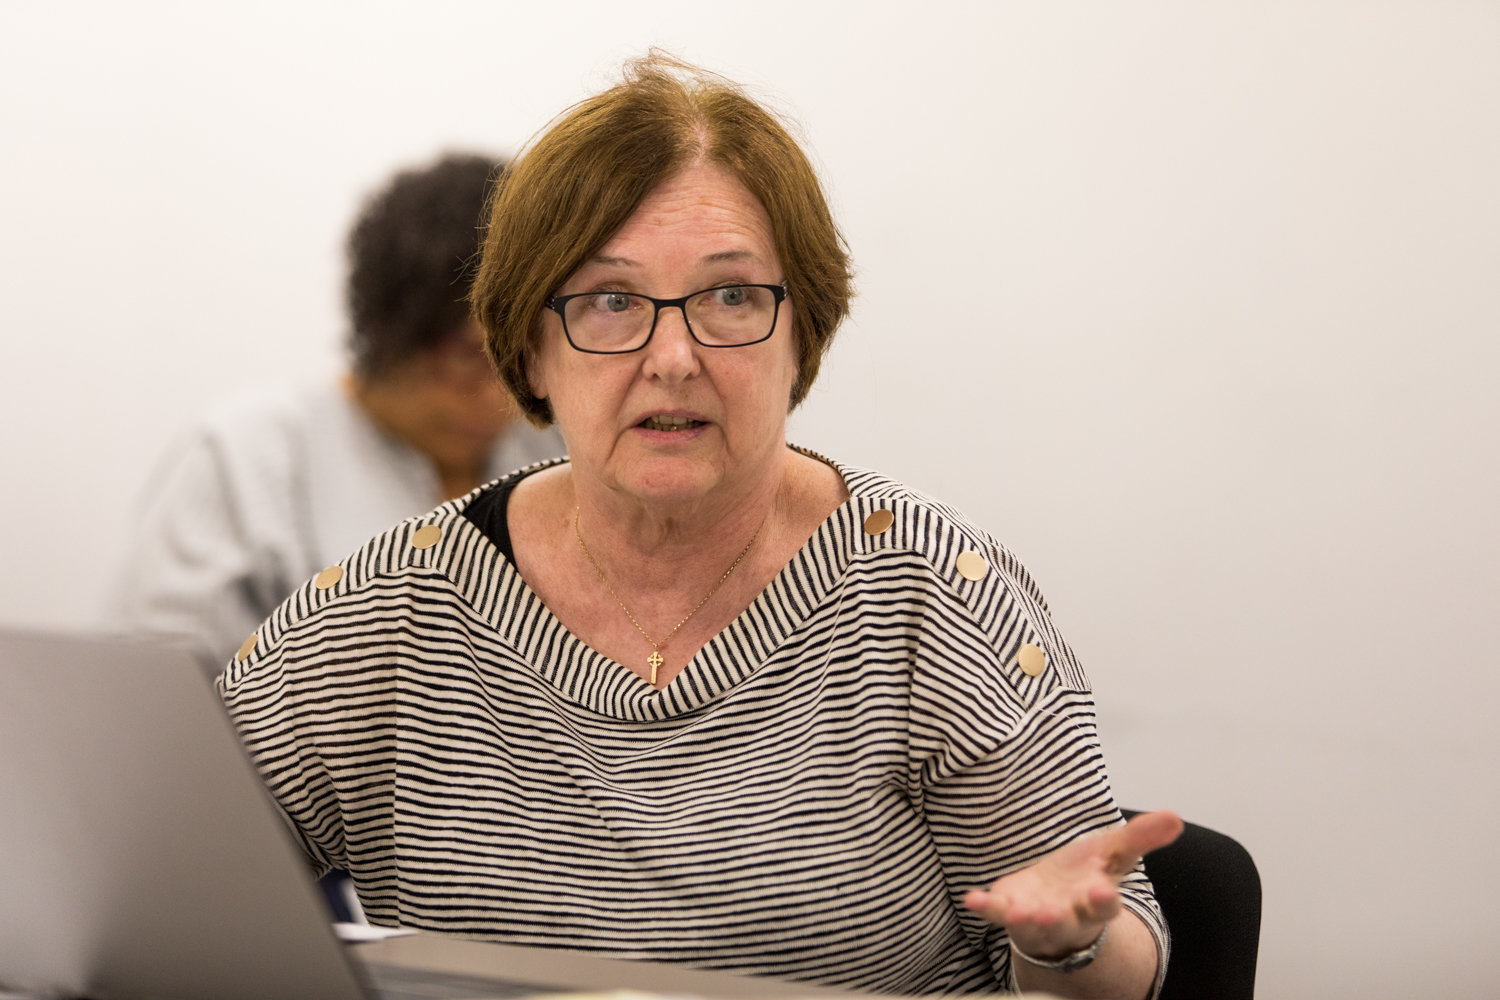 Community Board 8 chair Rosemary Ginty will vacate her seat this summer, and the race to fill it is heating up.